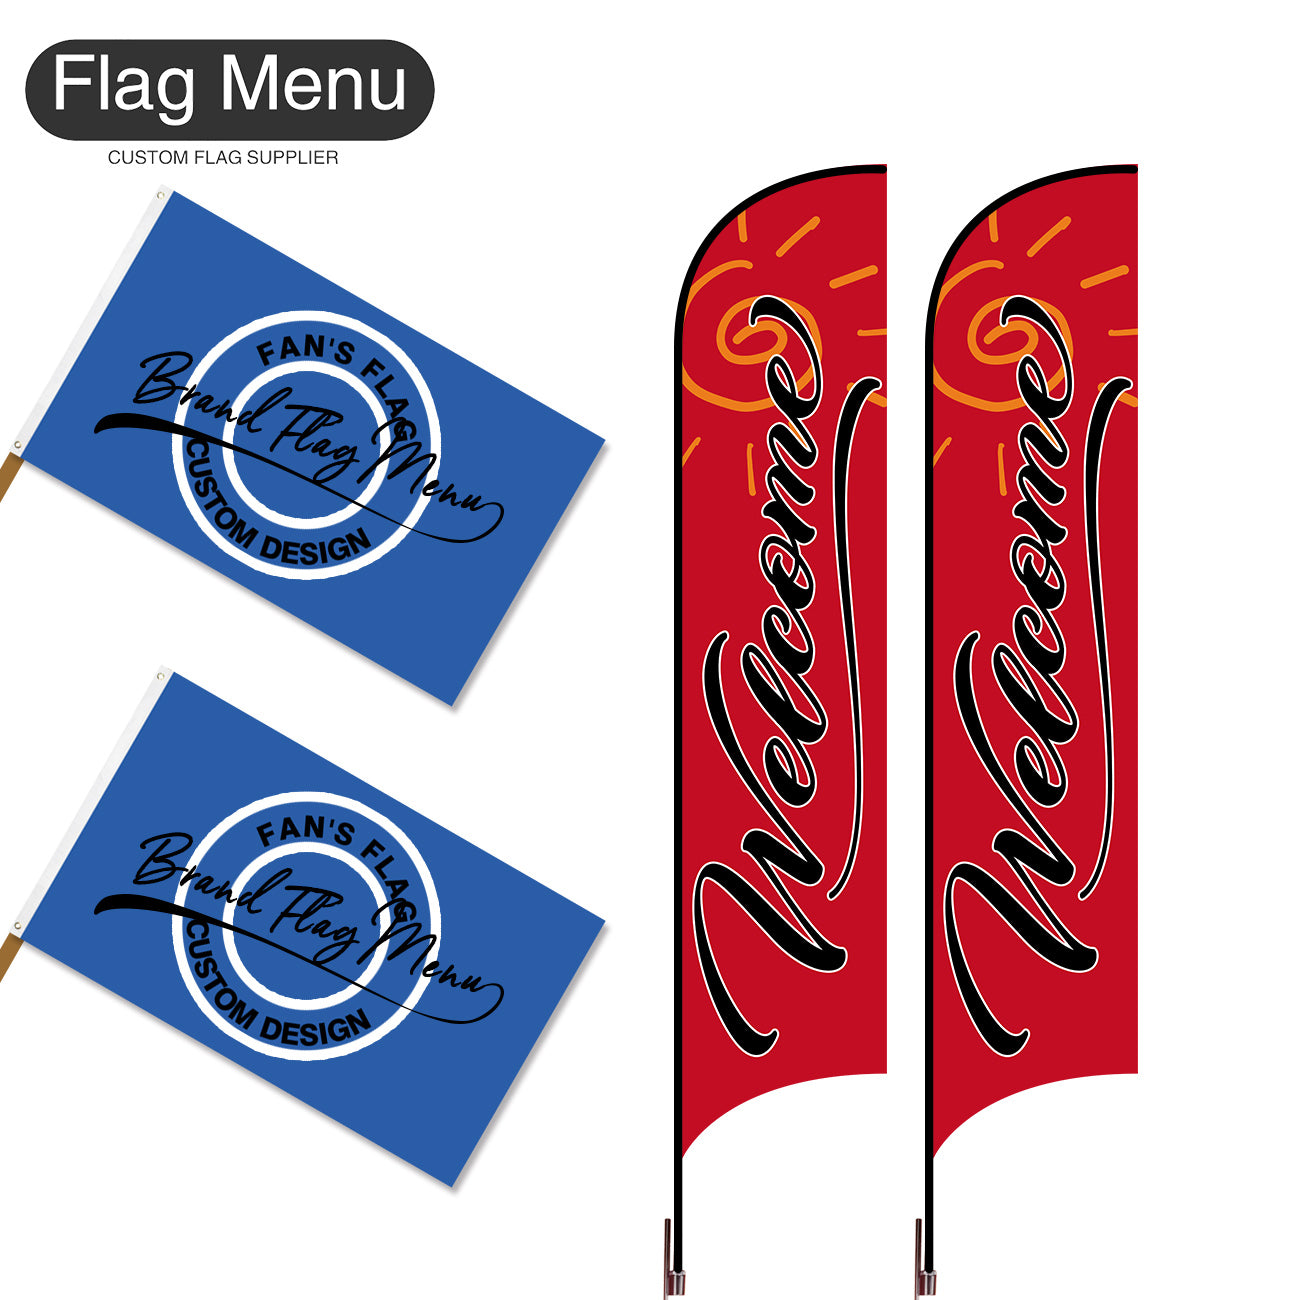 Outdoor Advertising Set - D-Red-S - Feather Flag -Double Sided & 3'x5' Regular Flag -Single Sided-Cross & Water Bag-Flag Menu